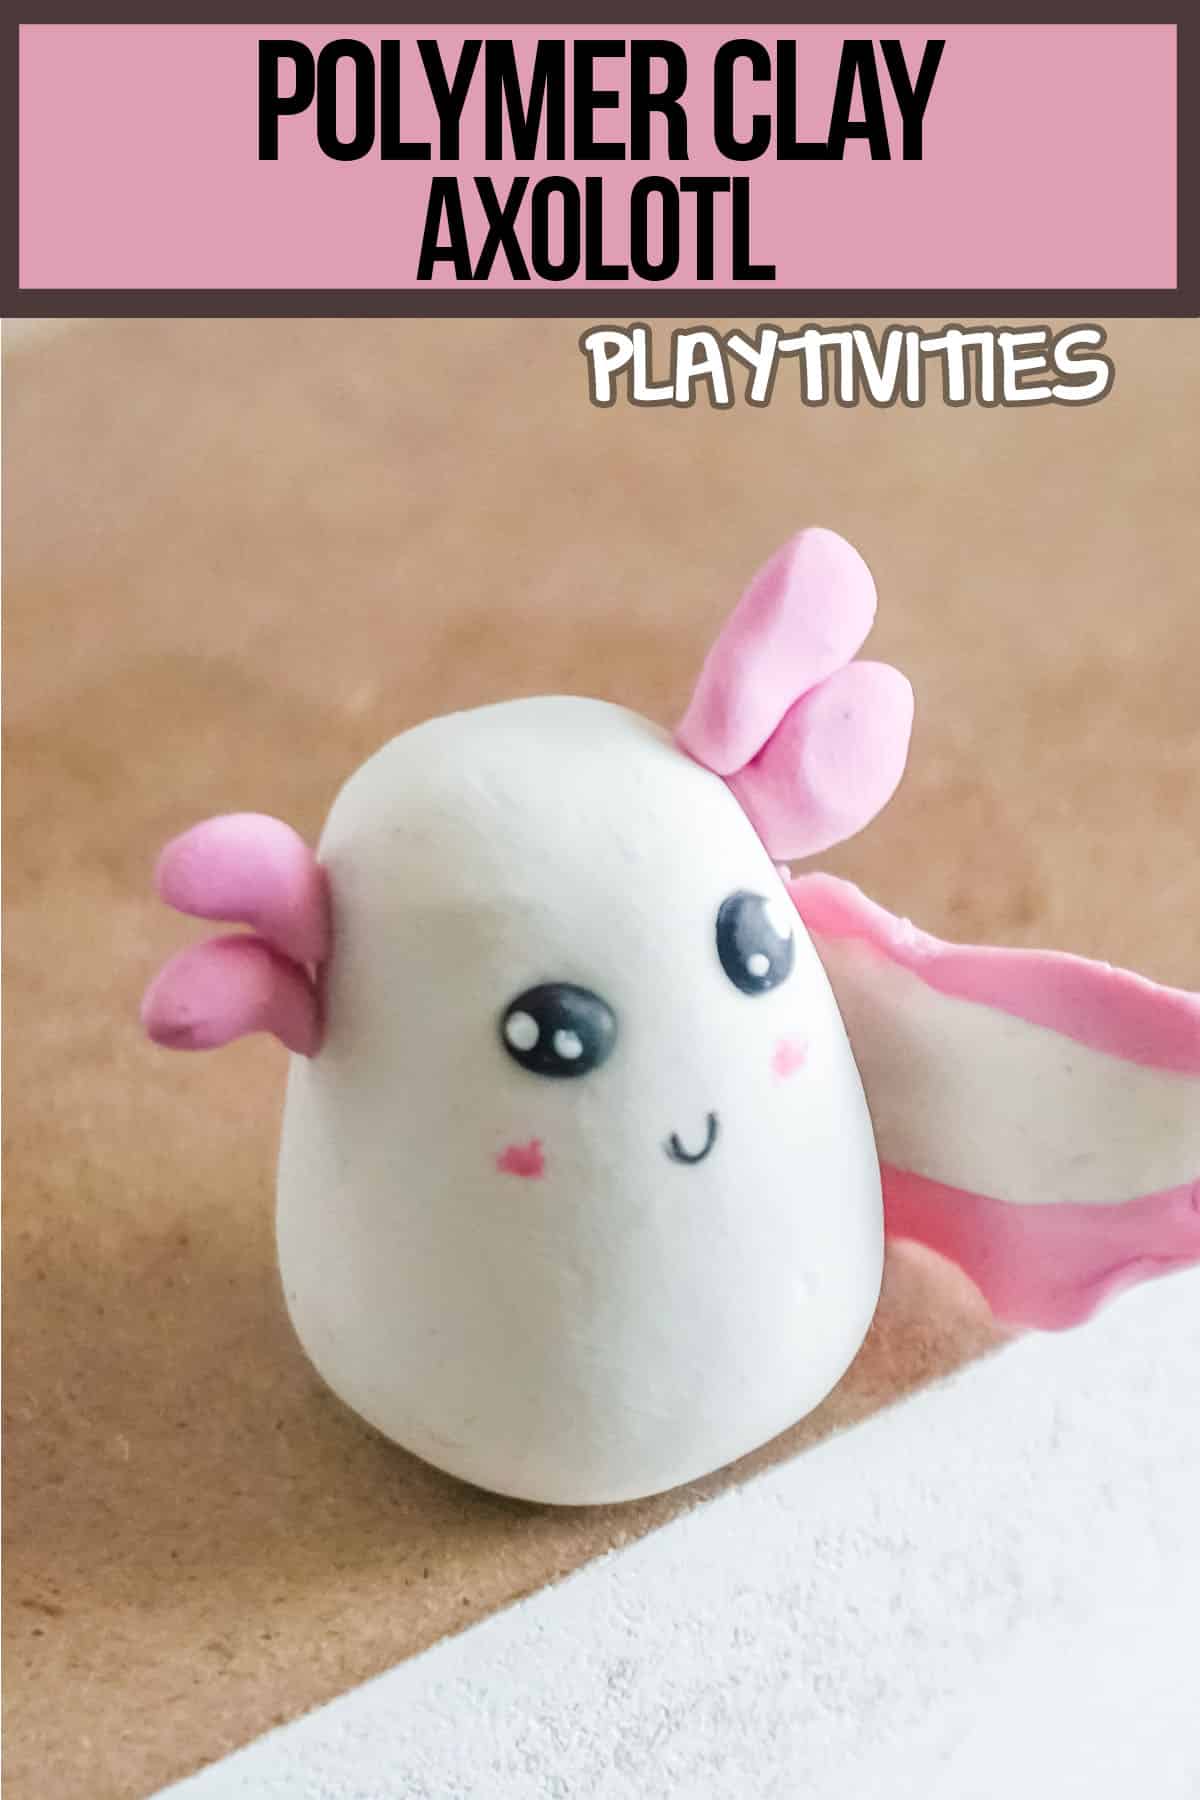 easy diy clay axolotl craft for kids with text which reads polymer clay axolotl